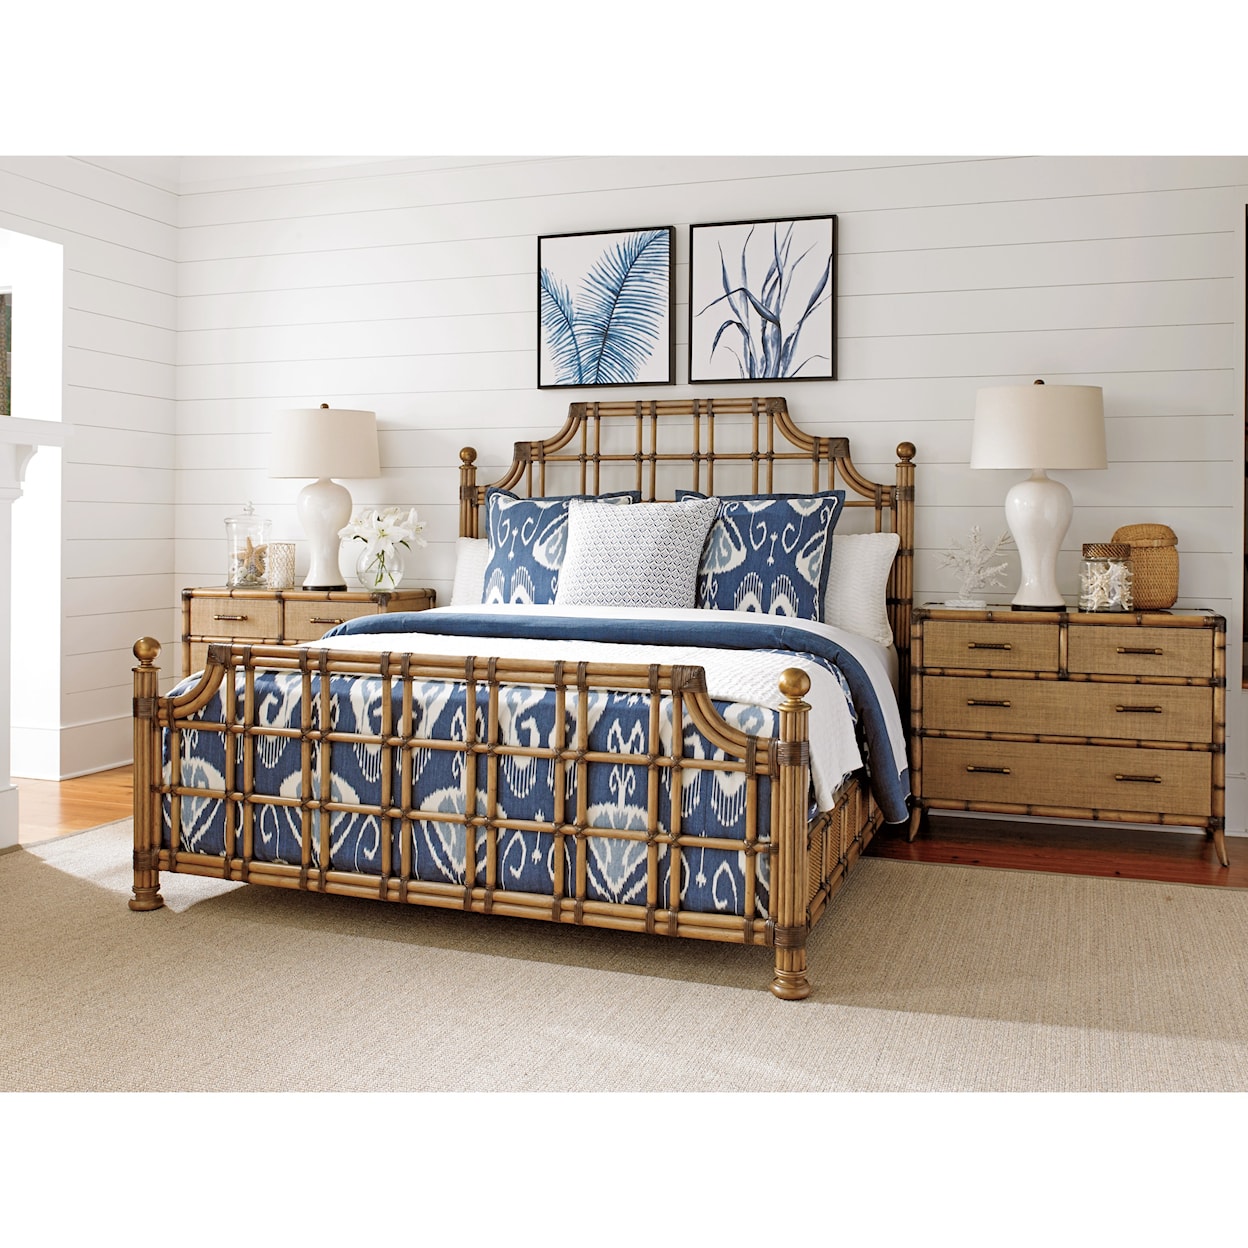 Tommy Bahama Home Twin Palms St. Kitts Queen Sized Headboard